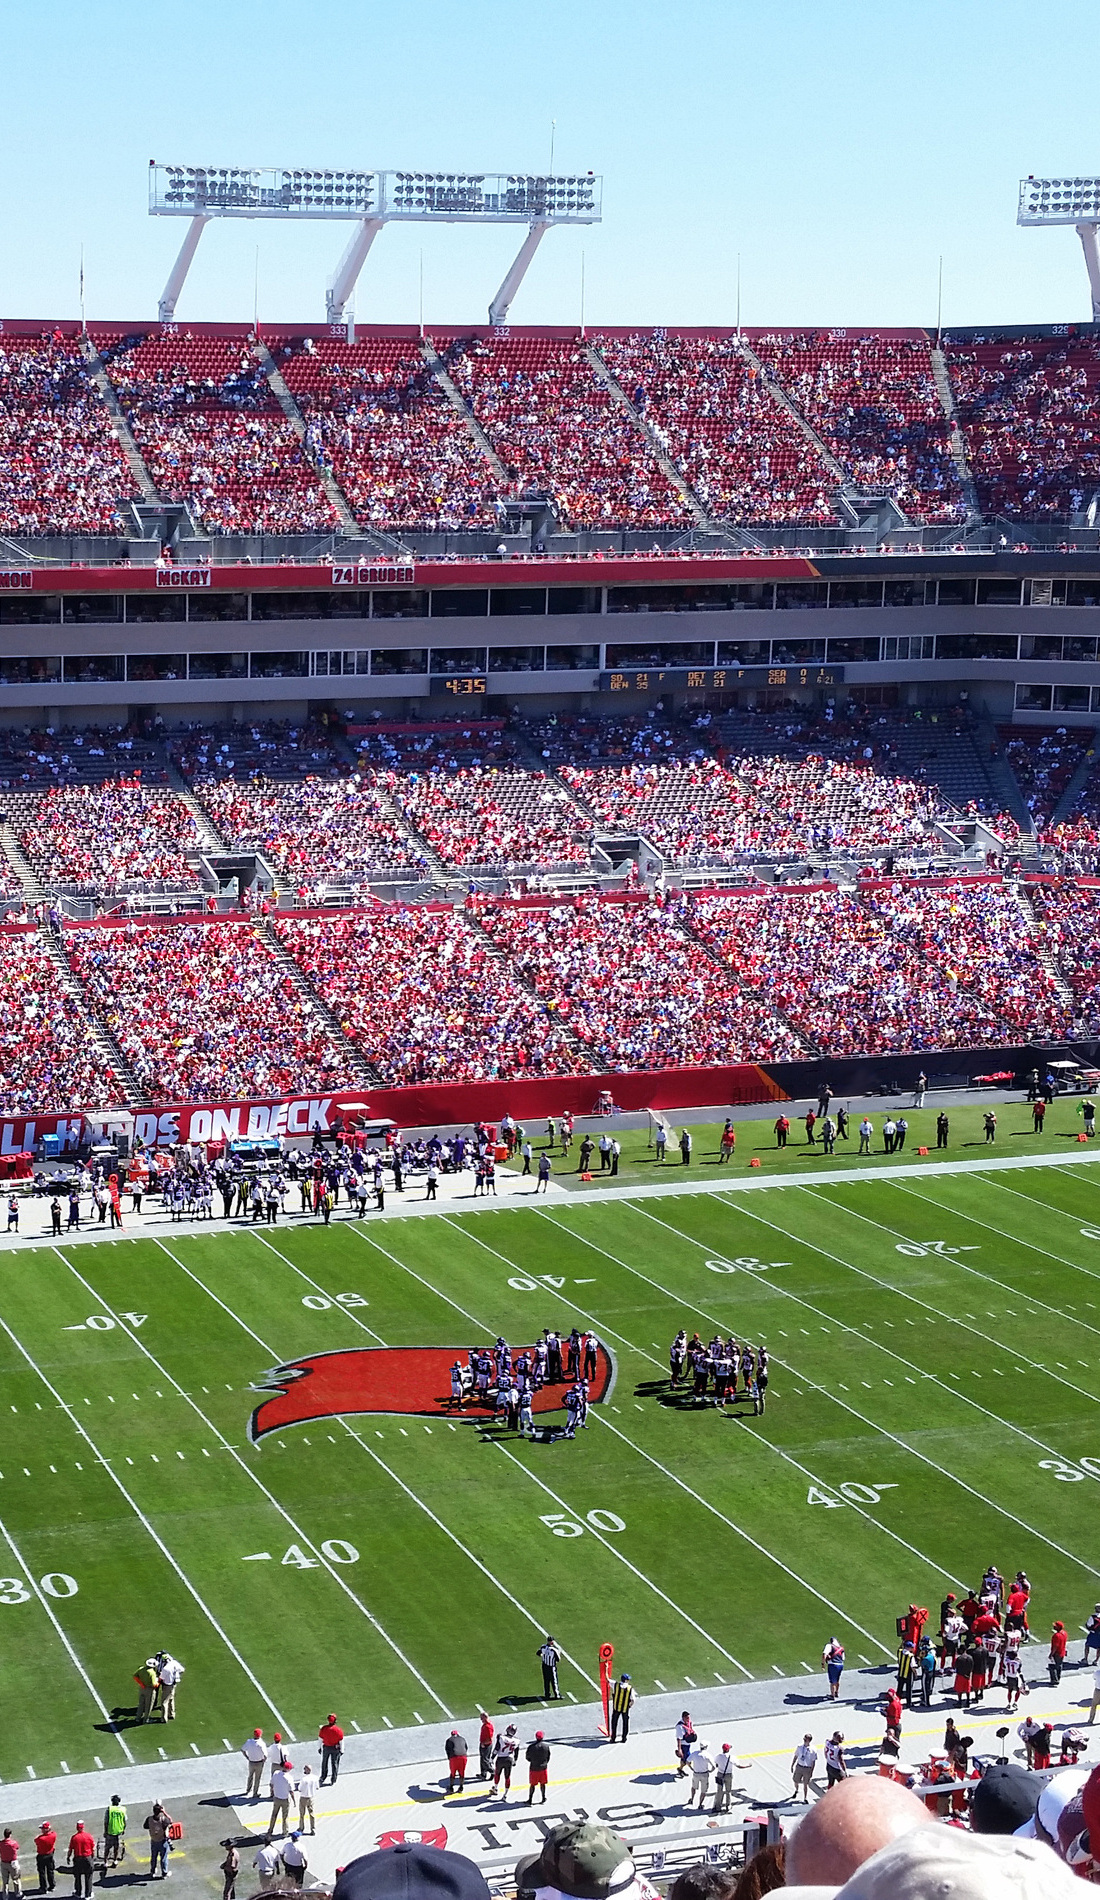 A Tampa Bay Buccaneers live event